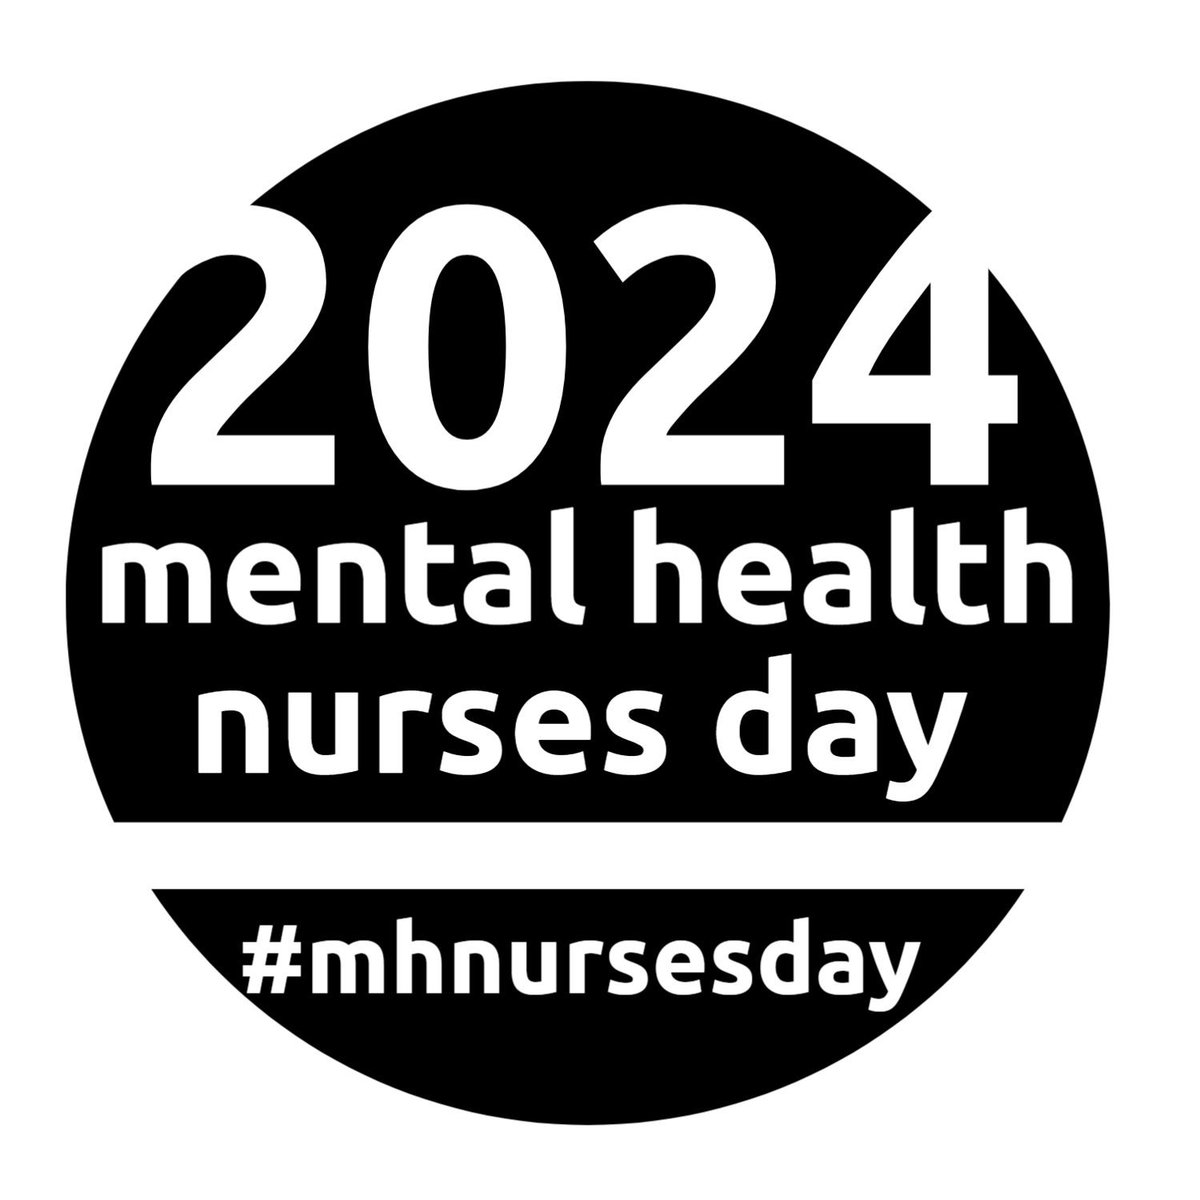 Happy #MentalHealthNursesDay to all the RMN’s out there! 

You work tirelessly in a cripplingly underfunded part of the Health Service, with 4 in 10 MH Trusts (41%) having staffing levels well below established levels

Today, let’s celebrate you and the exceptional work you do 💙